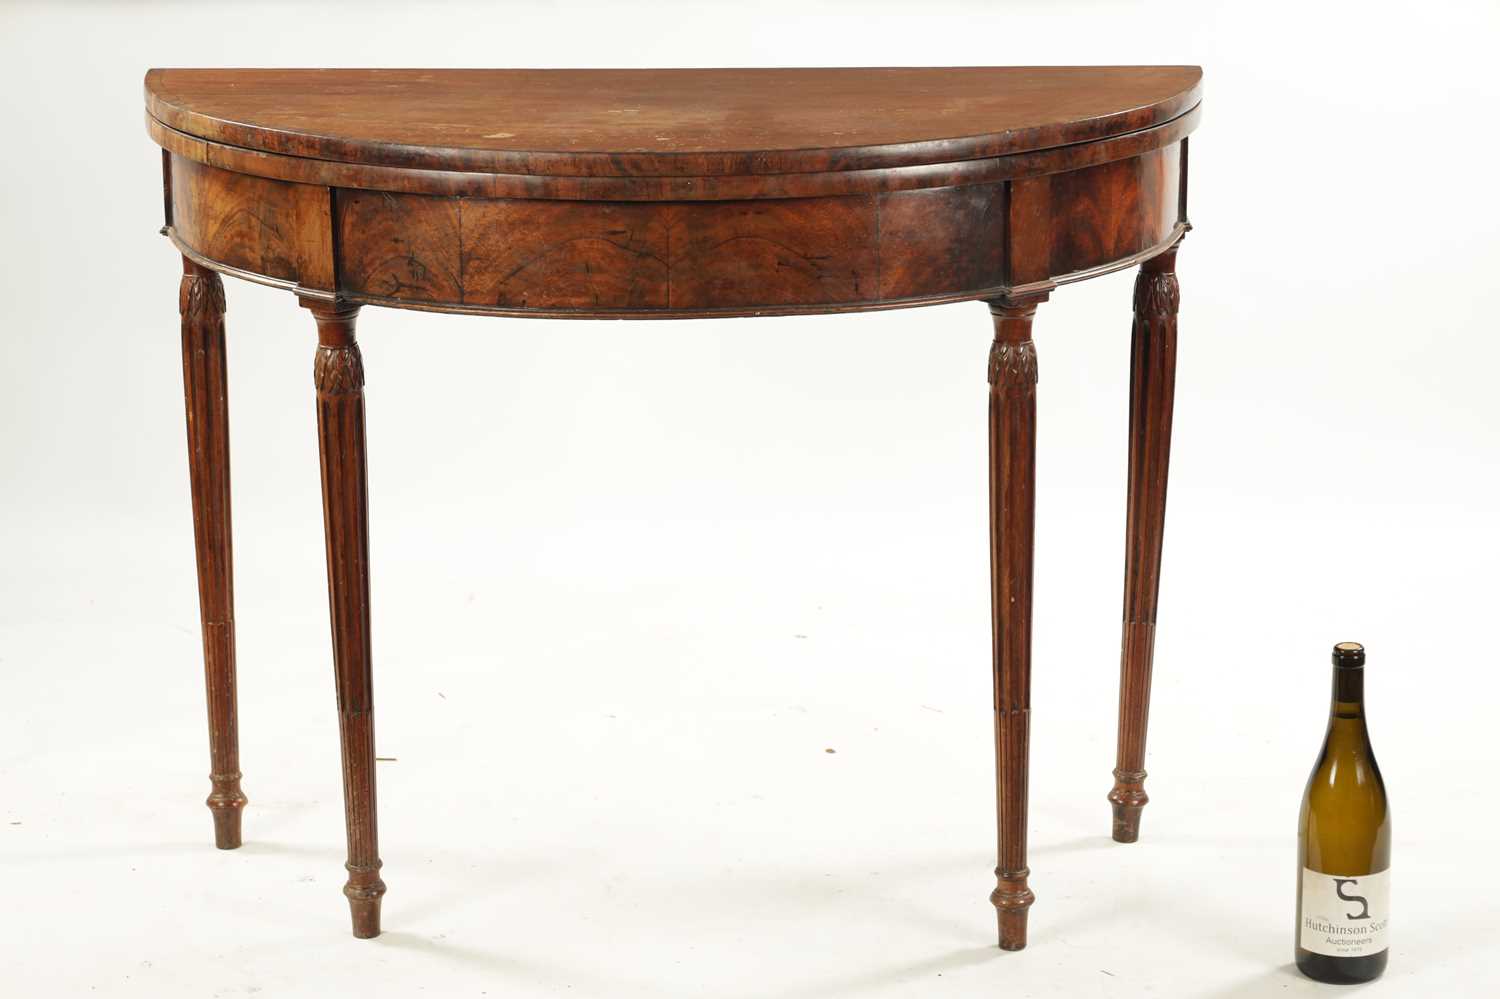 A LATE 18TH CENTURY DEMI LUNE CARD TABLE ON FLUTED LEGS IN THE MANNER OF GILLOWS - Image 2 of 7